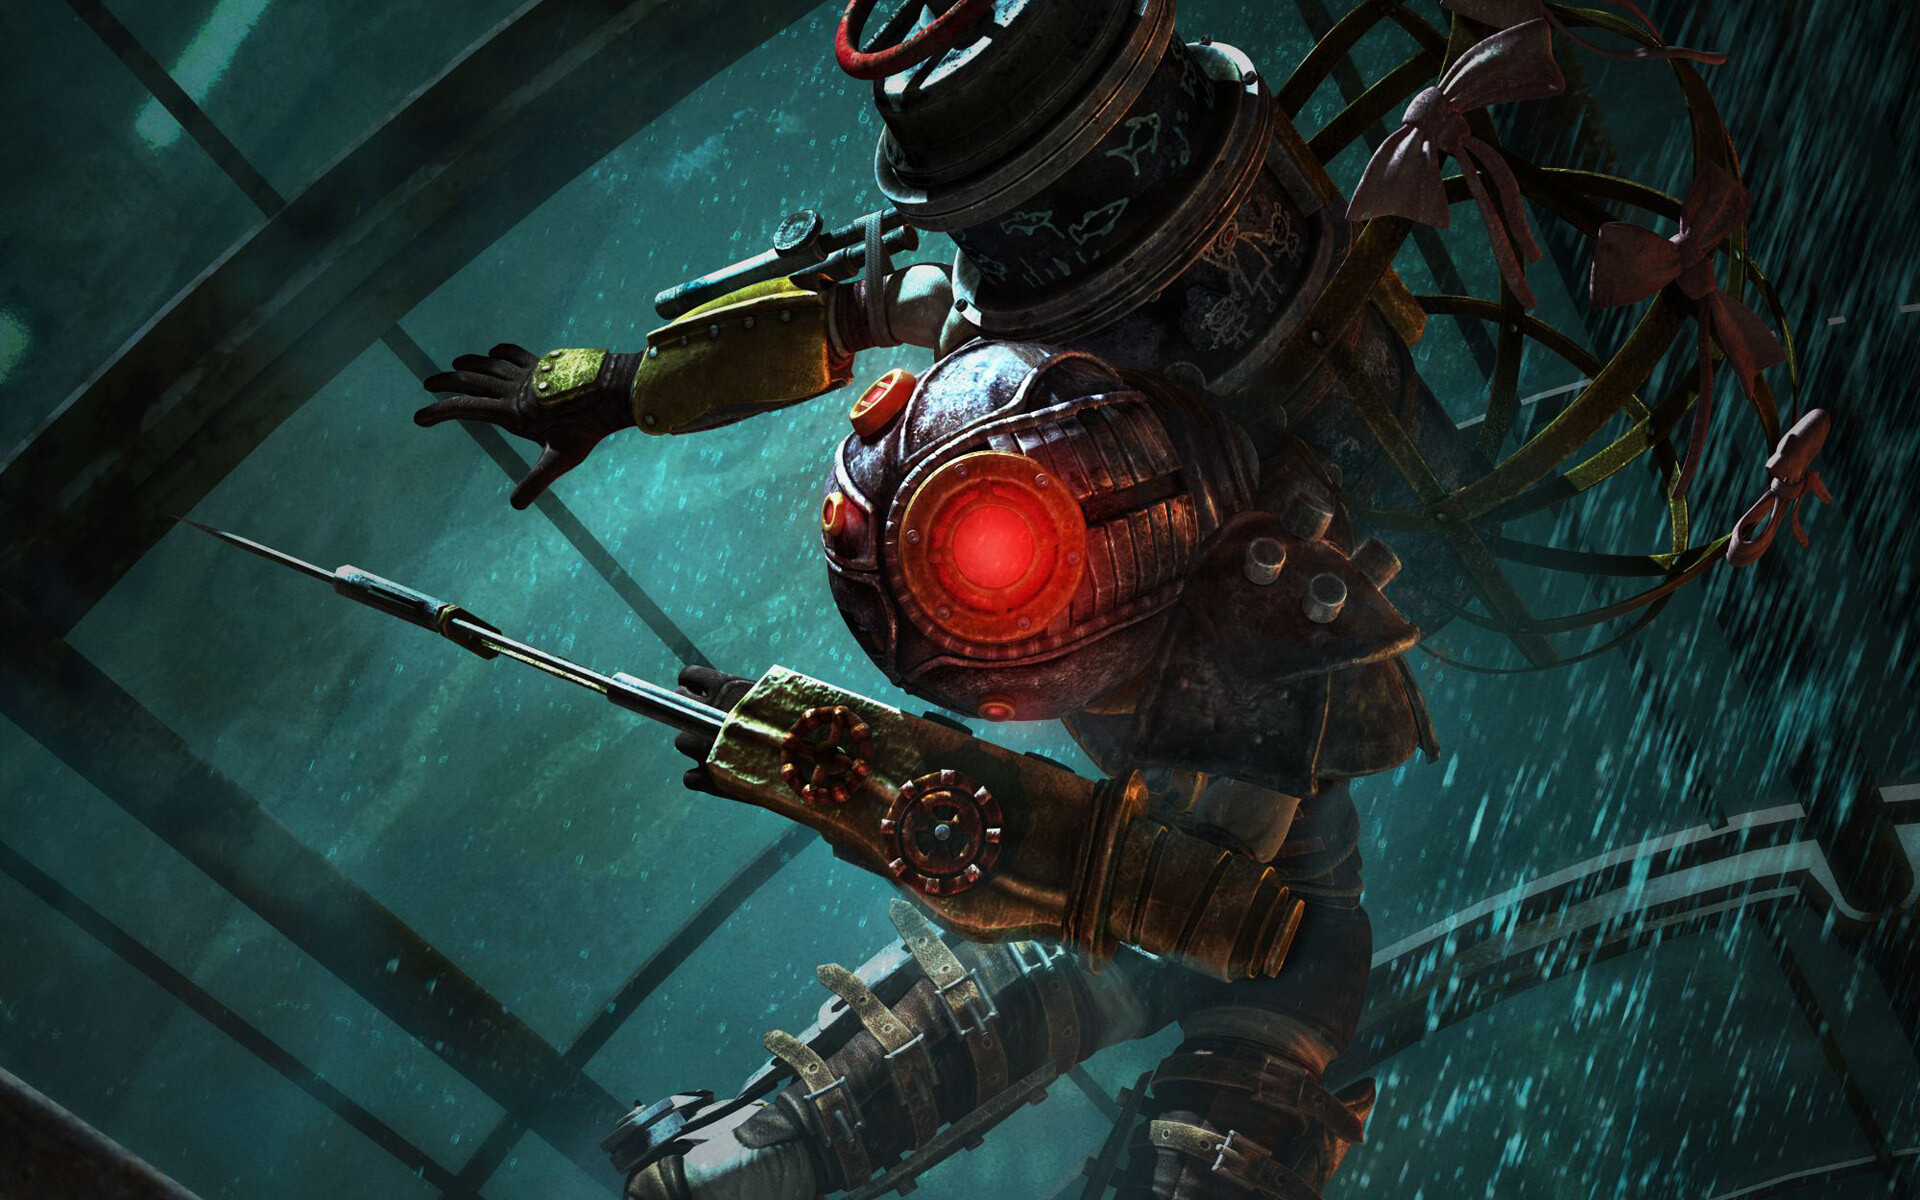 BioShock: An FPS with some RPG-like customization elements. 1920x1200 HD Wallpaper.